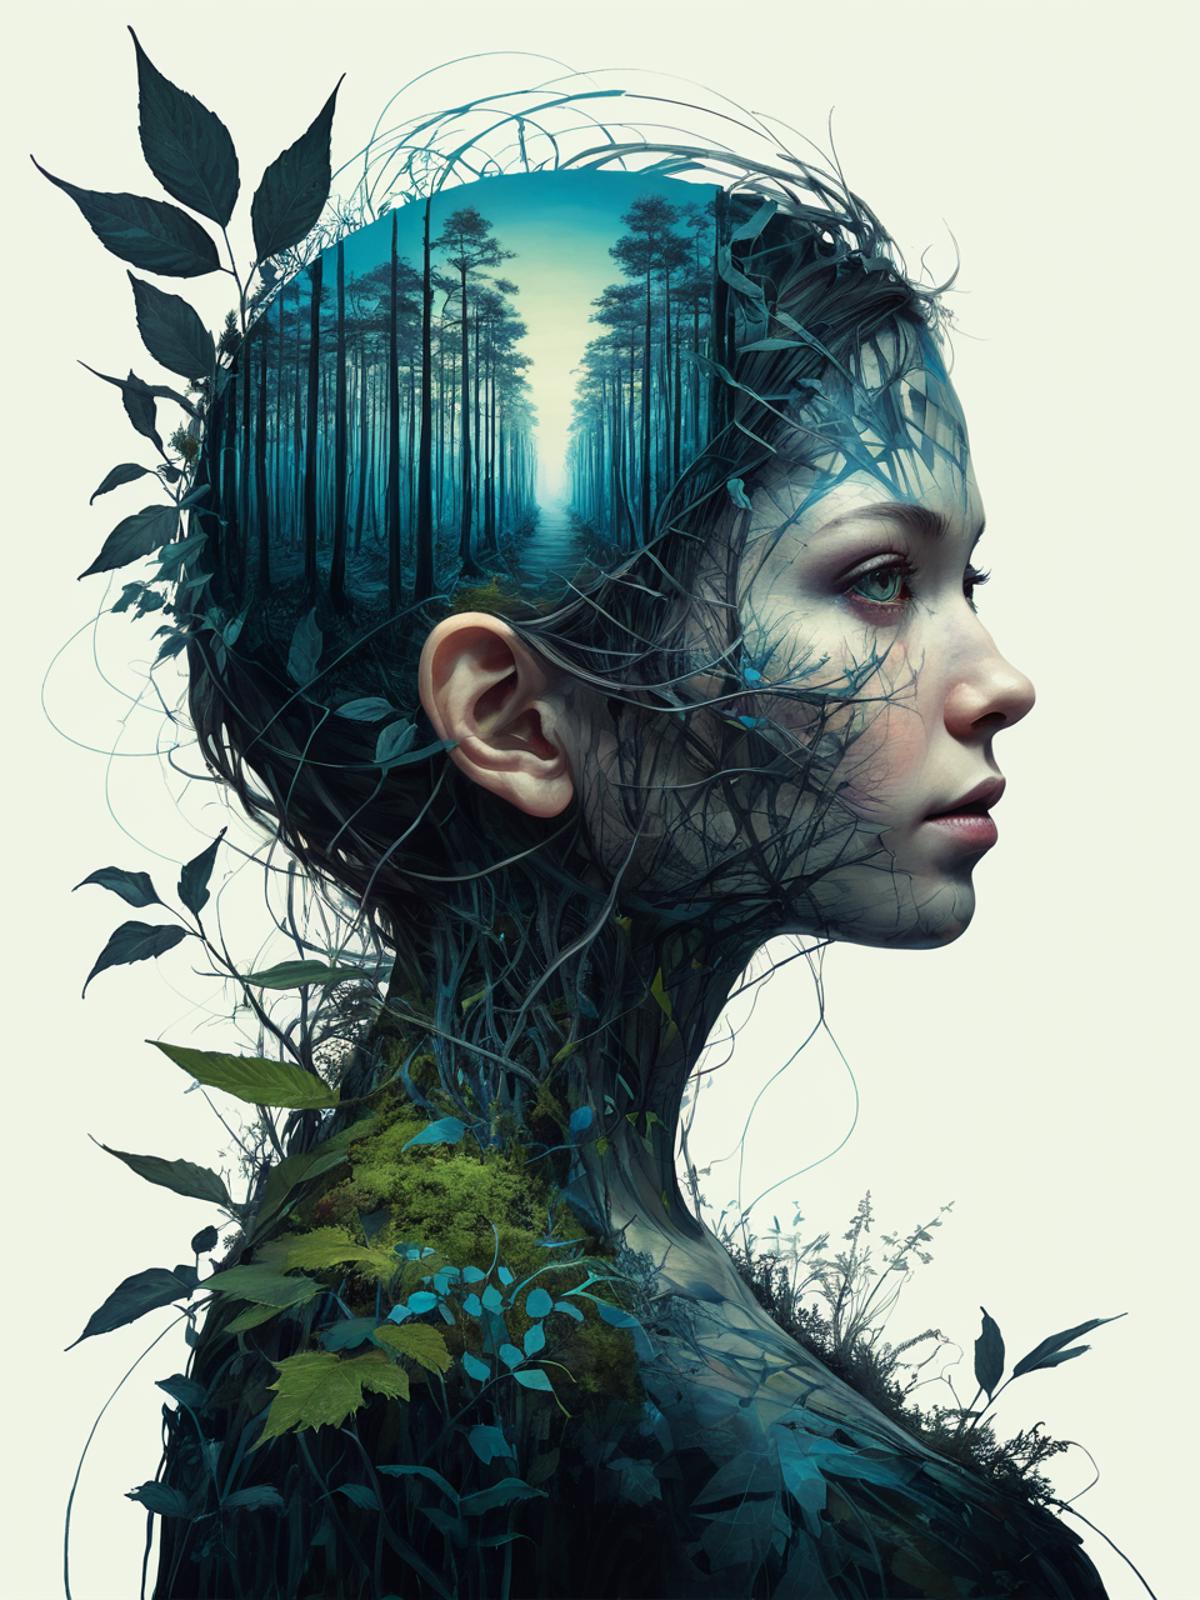 Face of a woman with tree branches growing from her head and neck, creating a forest-like appearance.